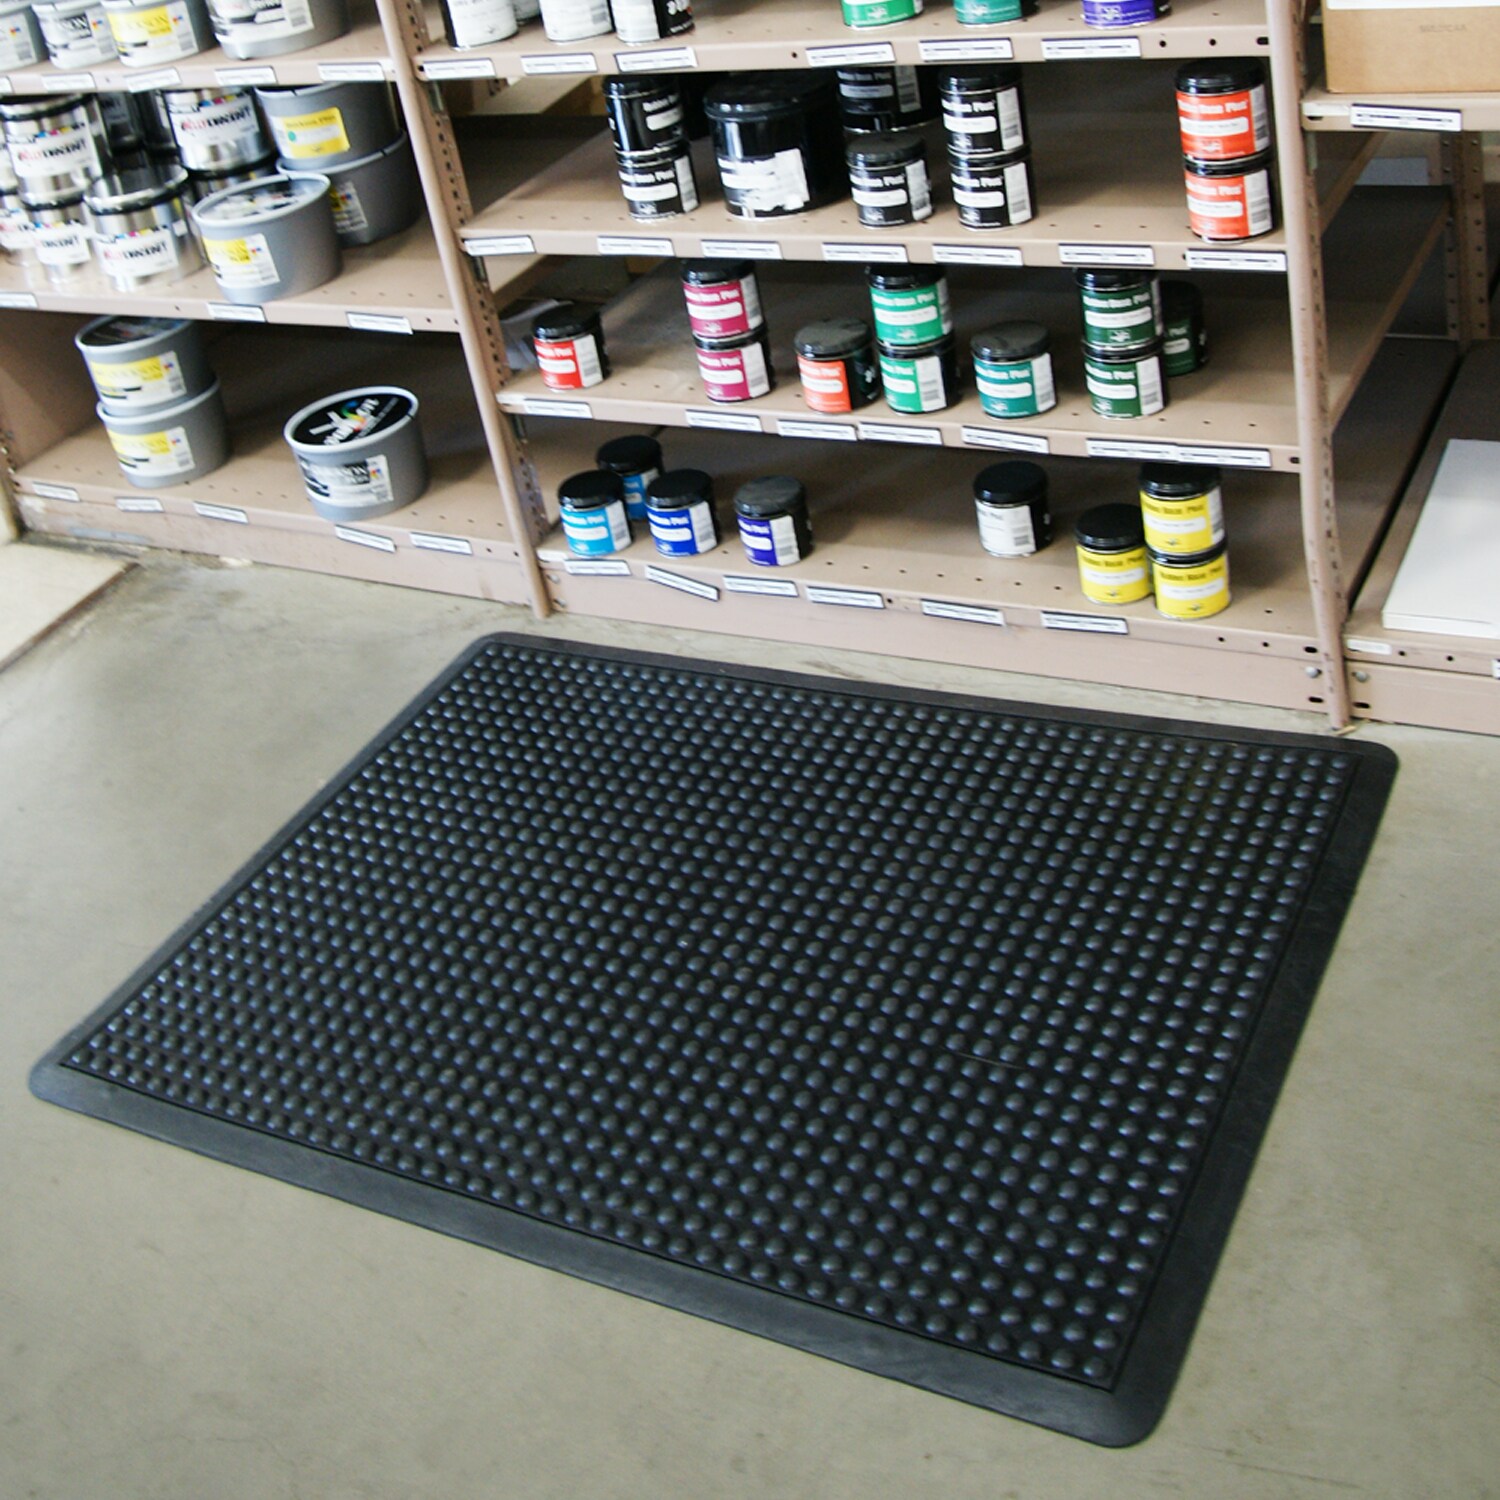 Durable Rubber Bubble Surface Fatigue Mat for Industrial/Factory Areas, 2'  x 3', Black